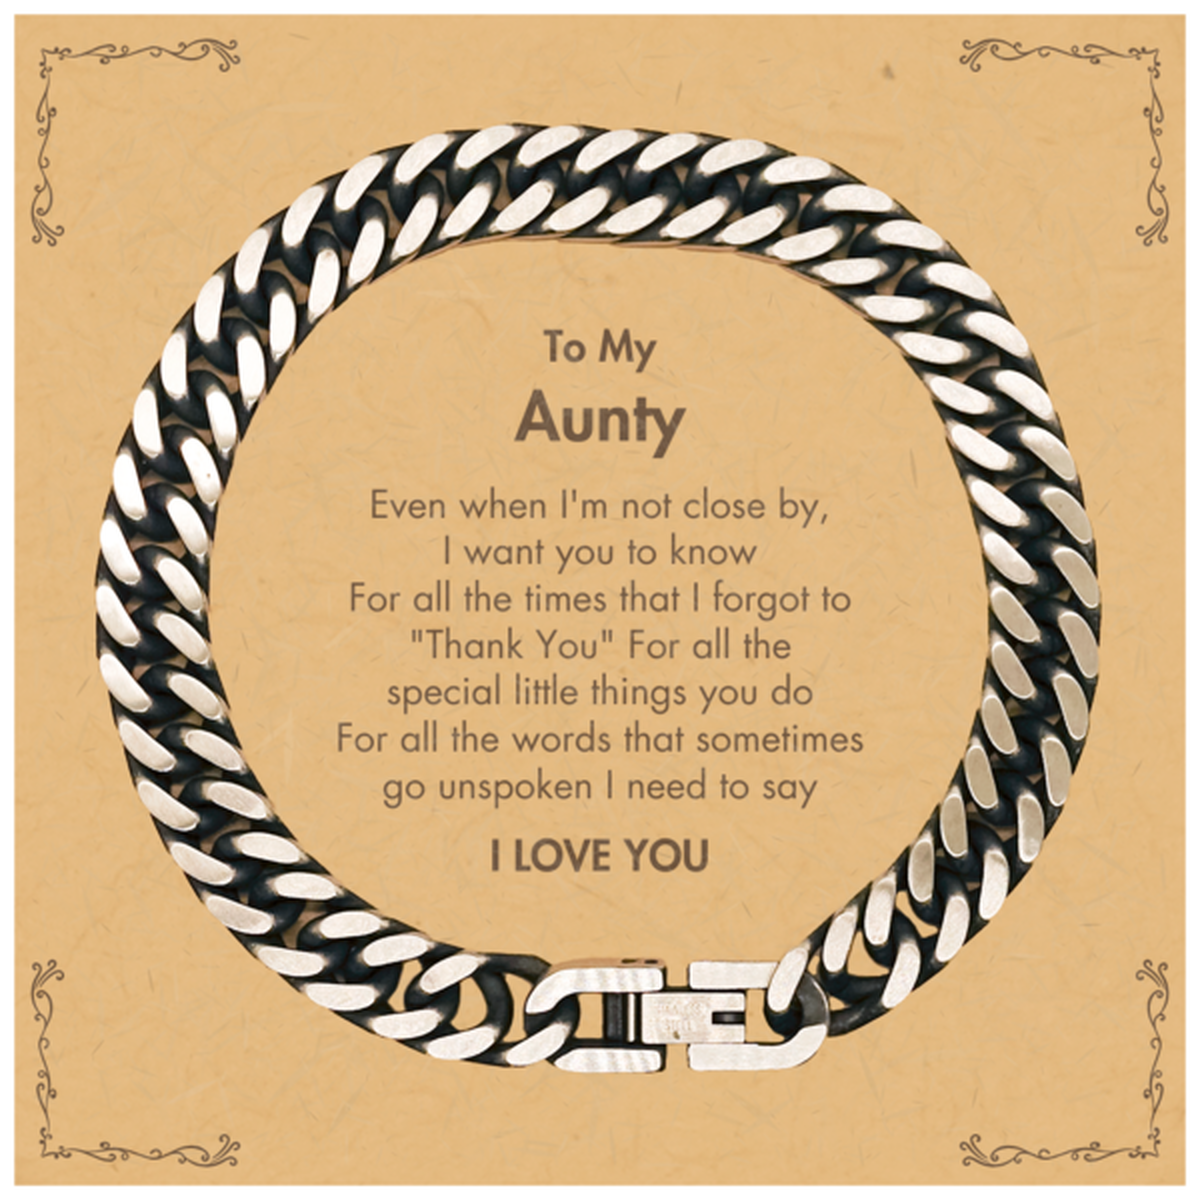 Thank You Gifts for Aunty, Keepsake Cuban Link Chain Bracelet Gifts for Aunty Birthday Mother's day Father's Day Aunty For all the words That sometimes go unspoken I need to say I LOVE YOU